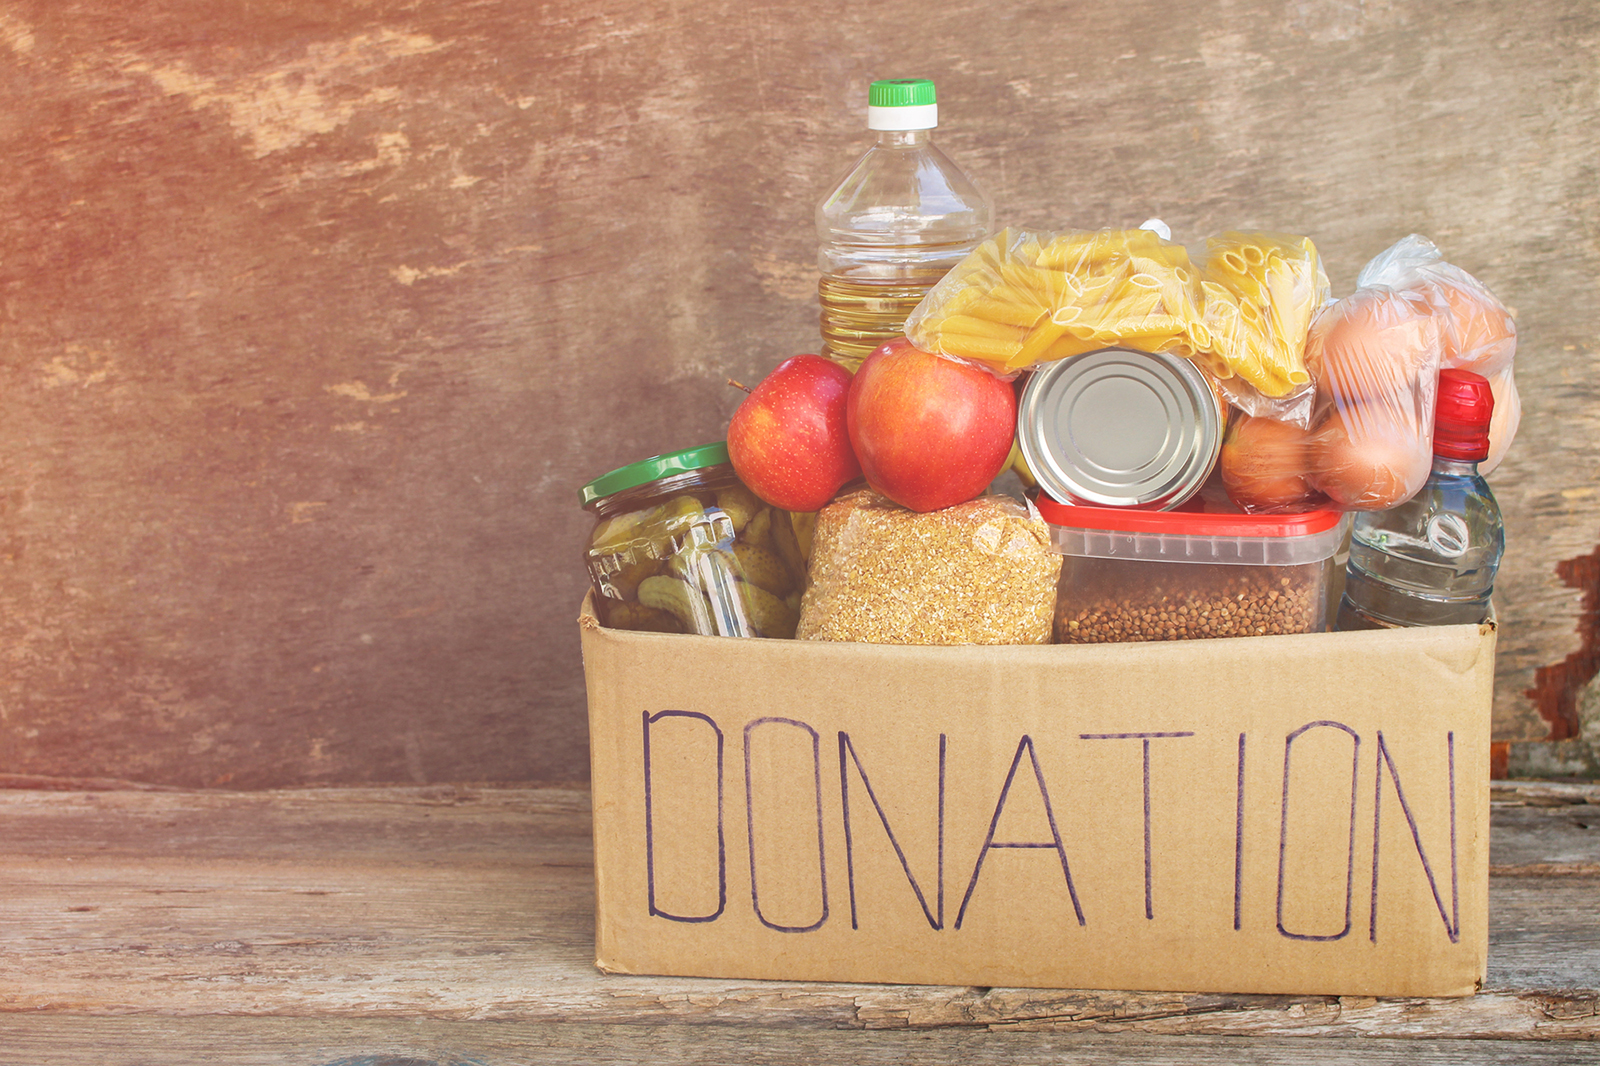 Donation box with food